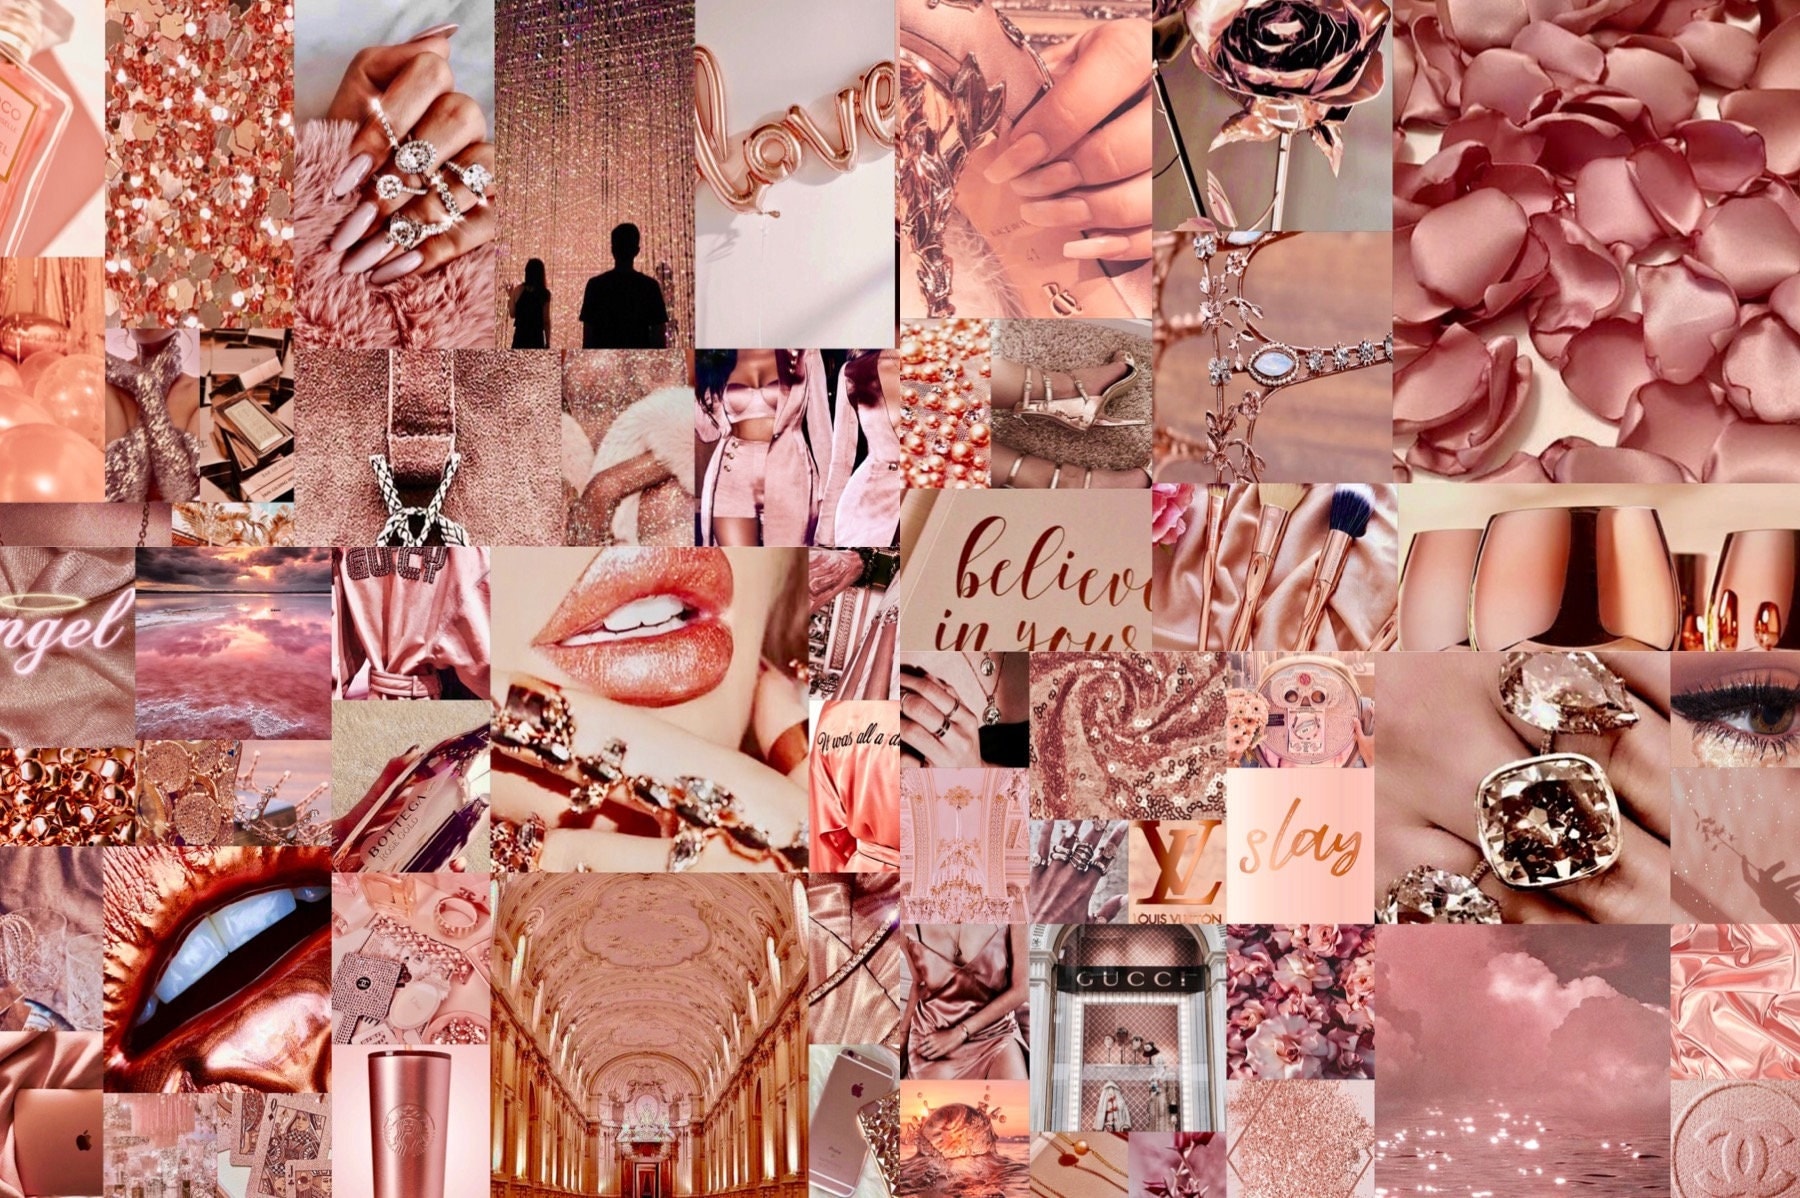 Wall Collage Kit Photo Boujee Rose Gold Tones Aesthetic